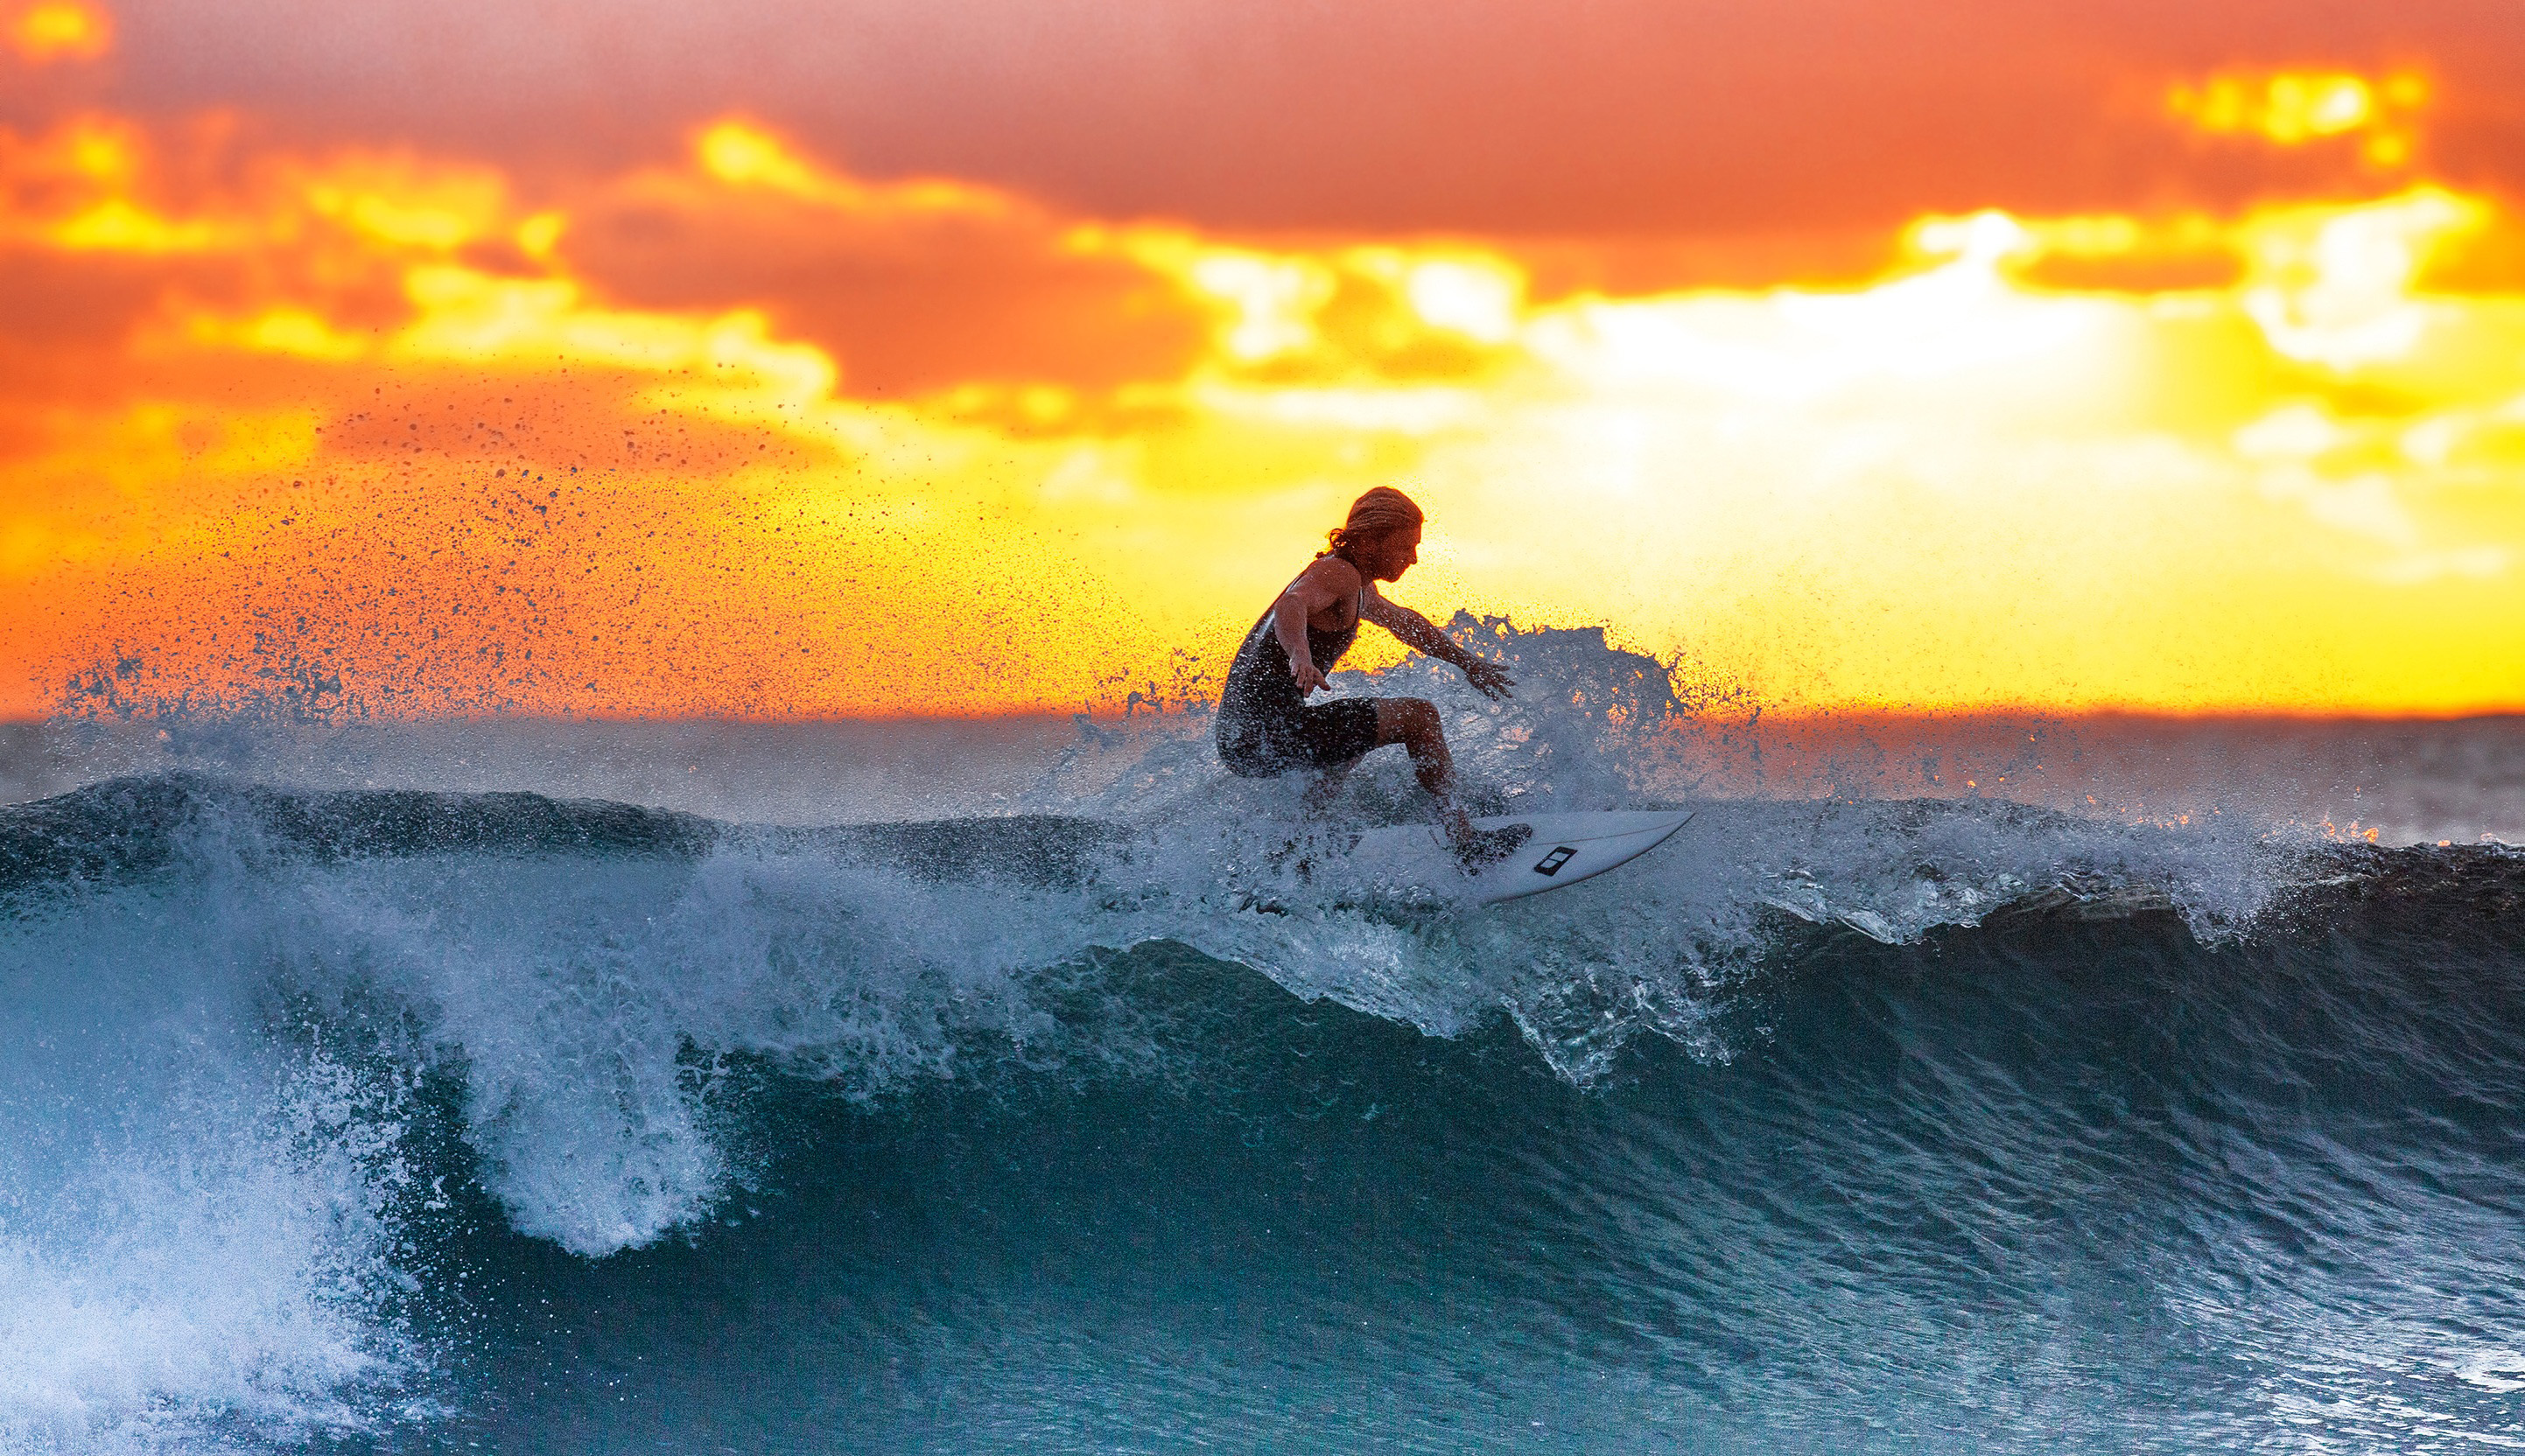 Man surfing a wave at sunset image - Free stock photo ...